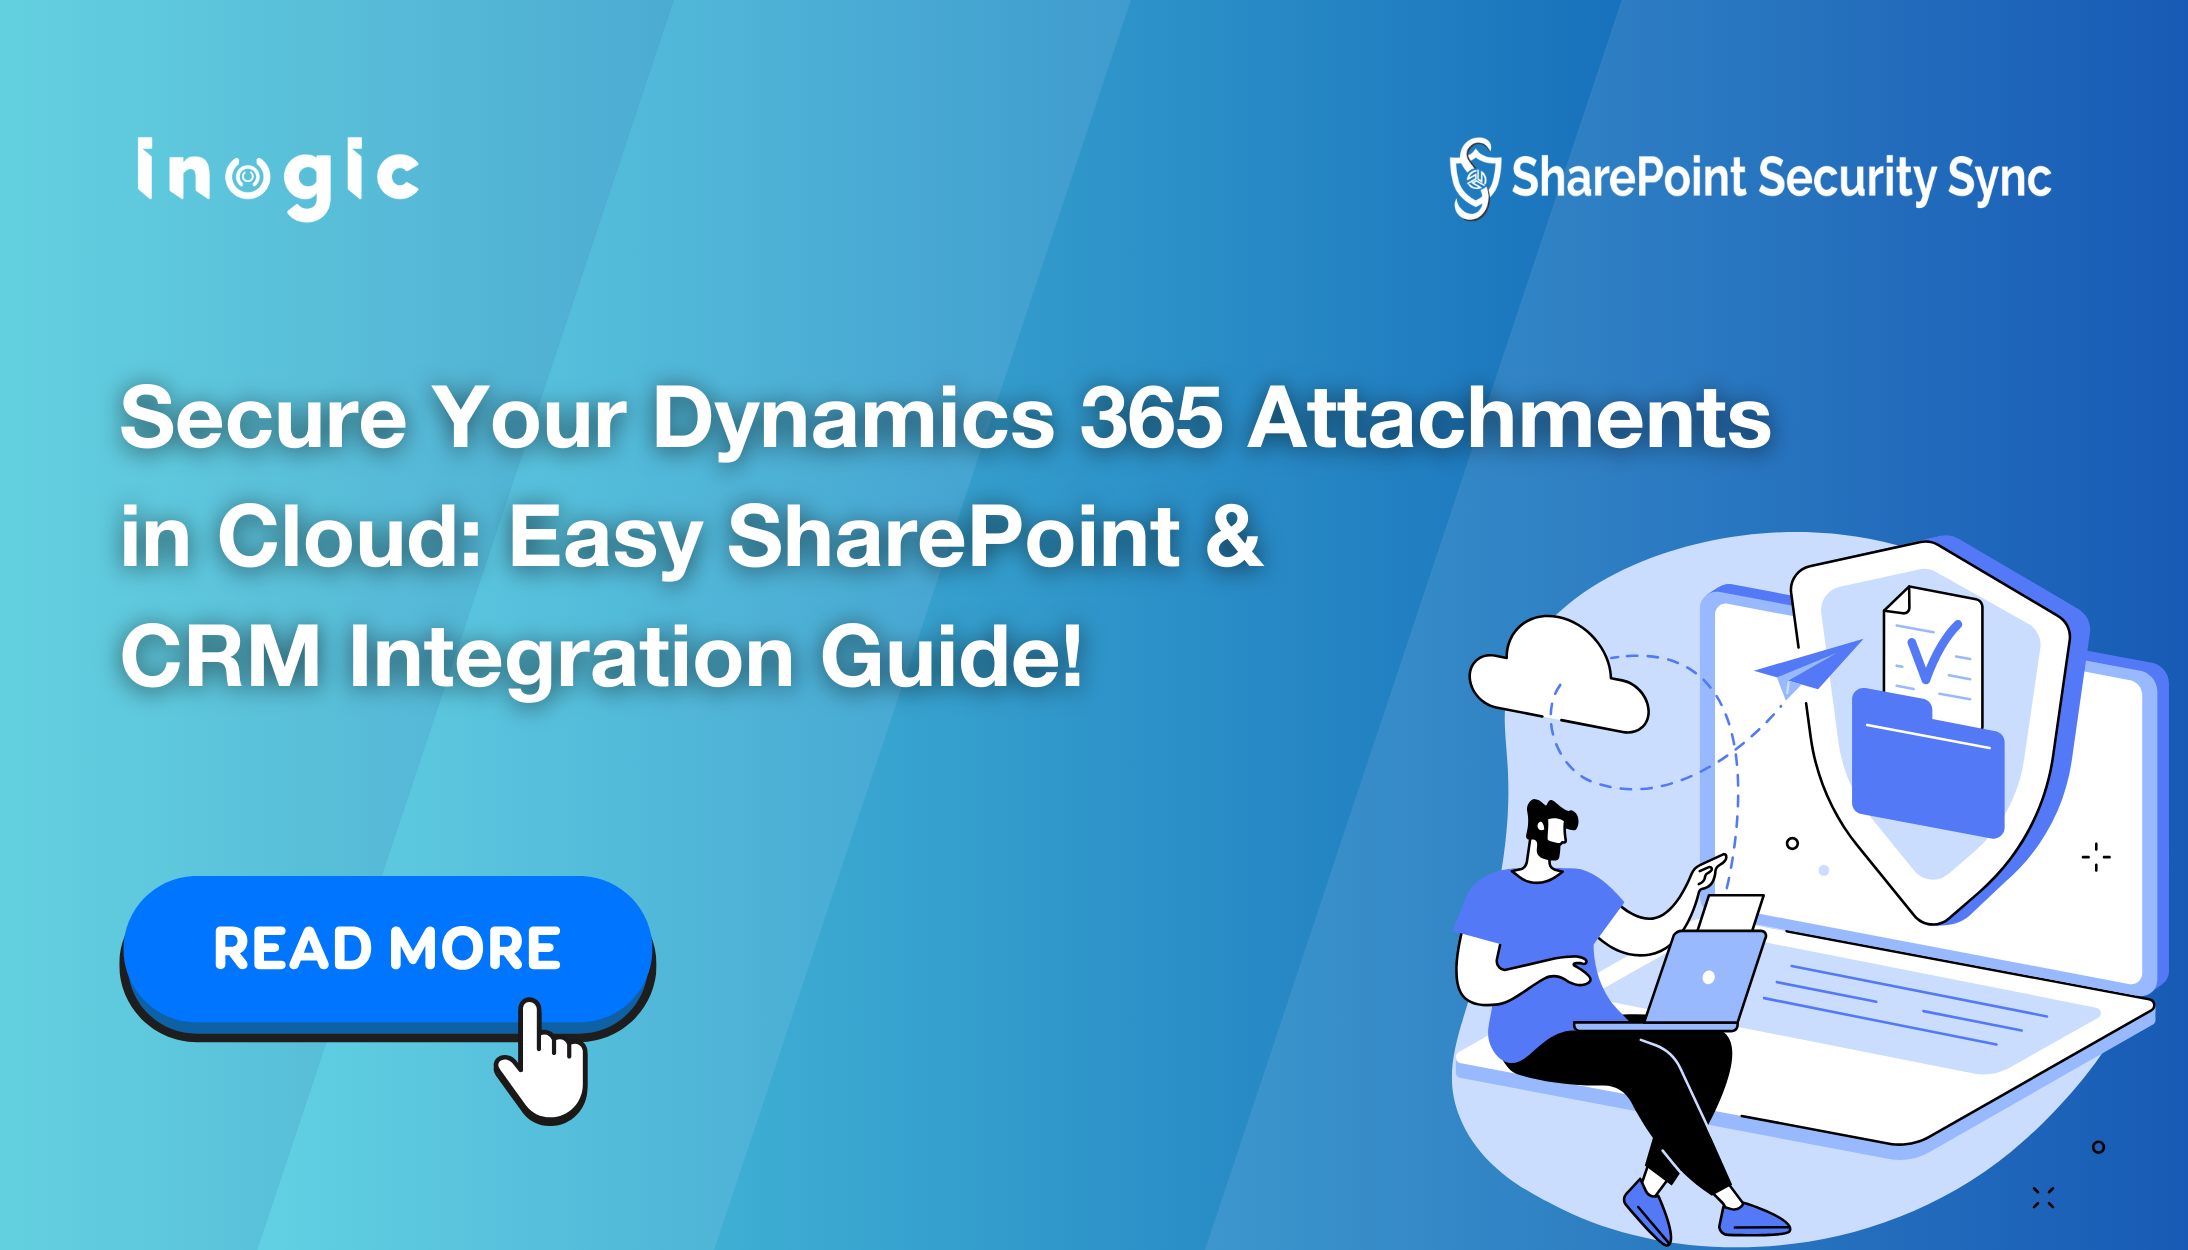 Secure Your Dynamics 365 Attachments in the Cloud: Easy SharePoint & CRM Integration Guide!